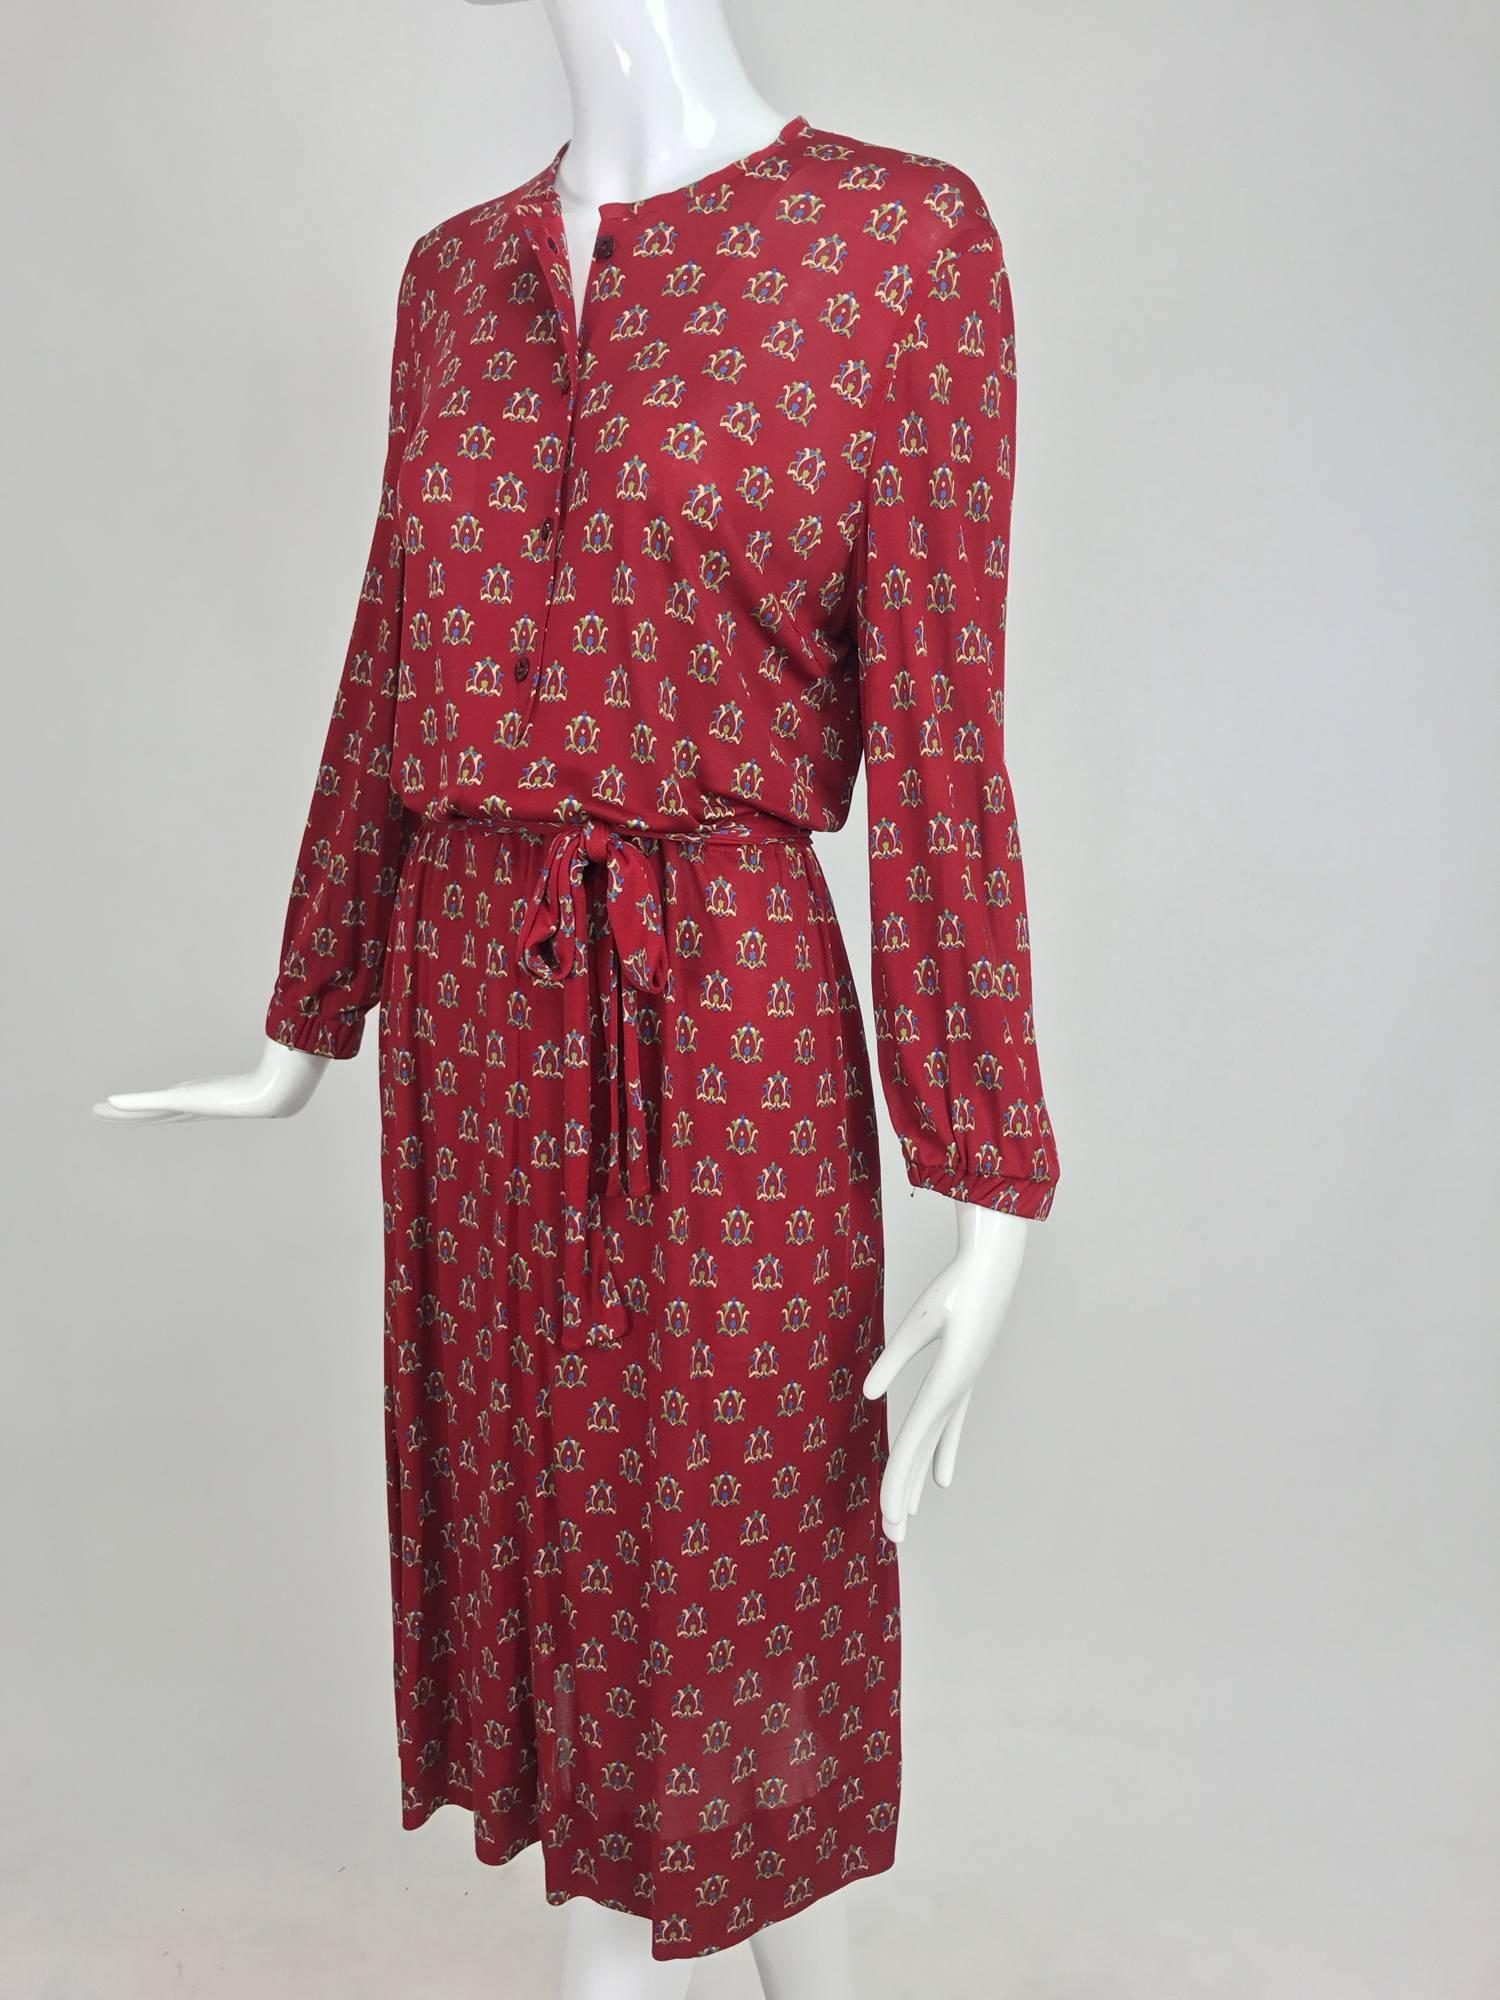 Vintage Celine fine wine silk knit print button front dress and belt 1970s...A great dress to travel with!  Round neckline, button front dress has long sleeves with cased elastic cuffs...Cased elastic waist and slightly flared skirt...Unlined fine